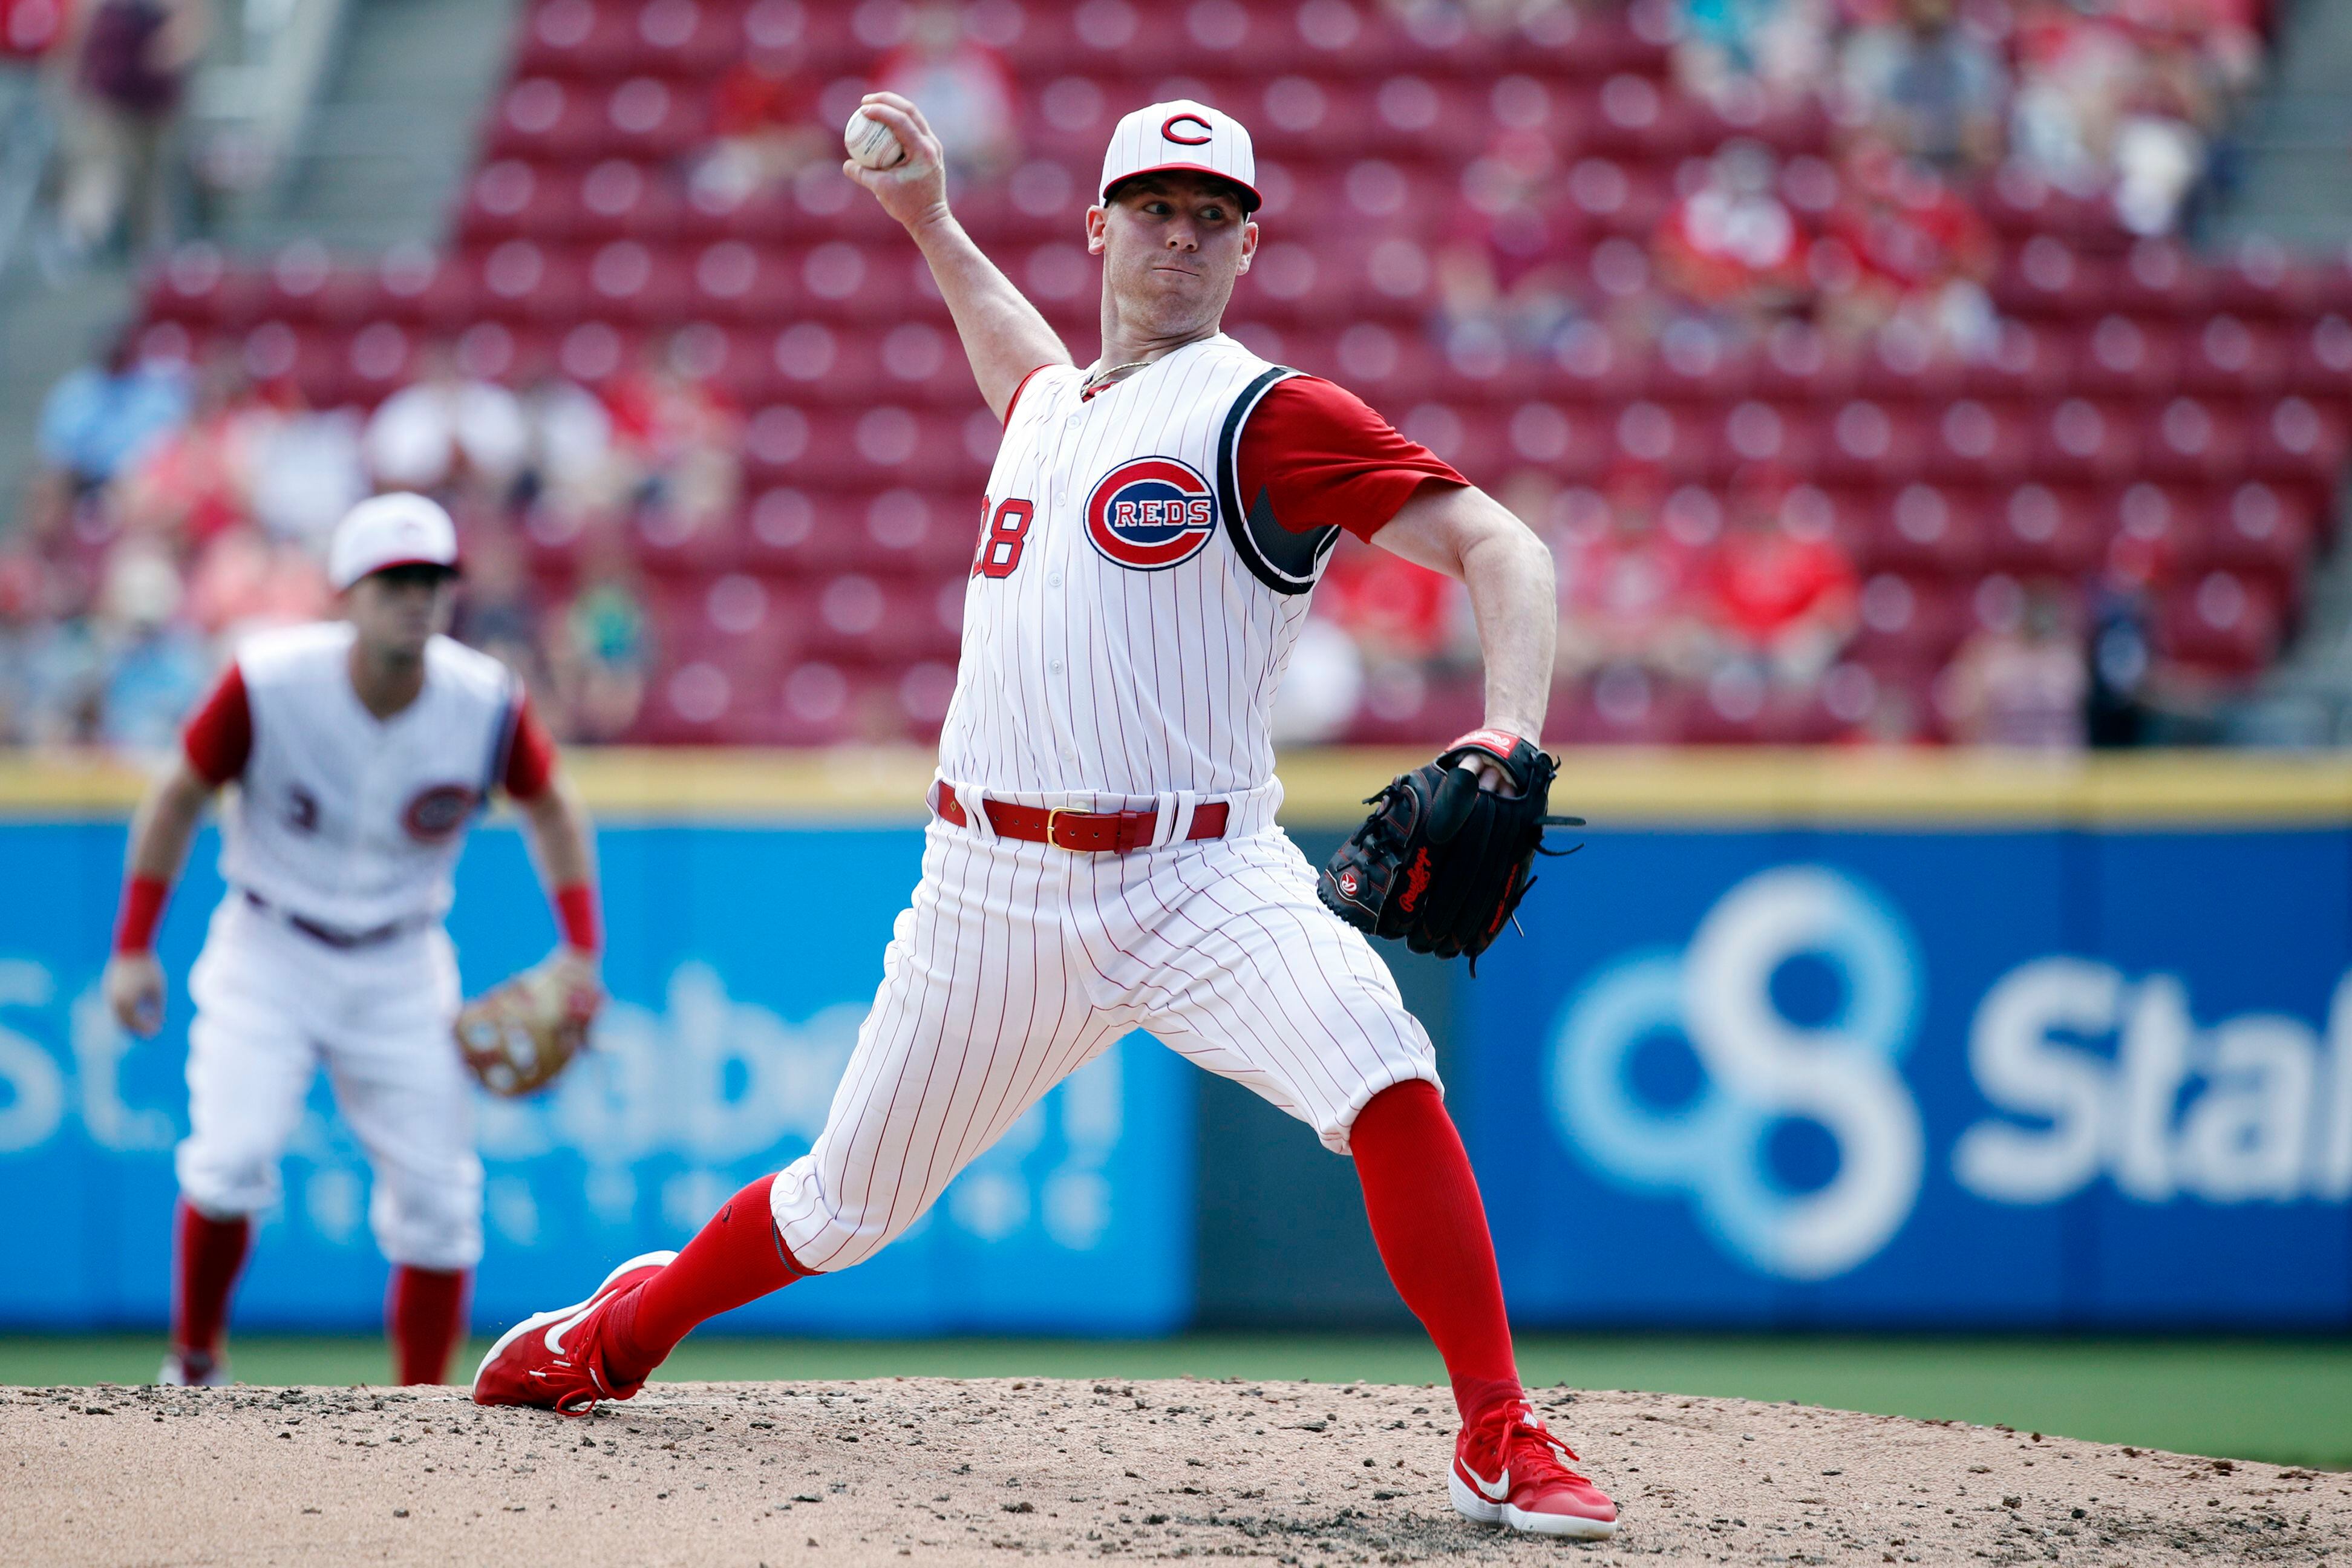 Reds wearing 1919 throwback uniforms for Sunday's game against Nationals